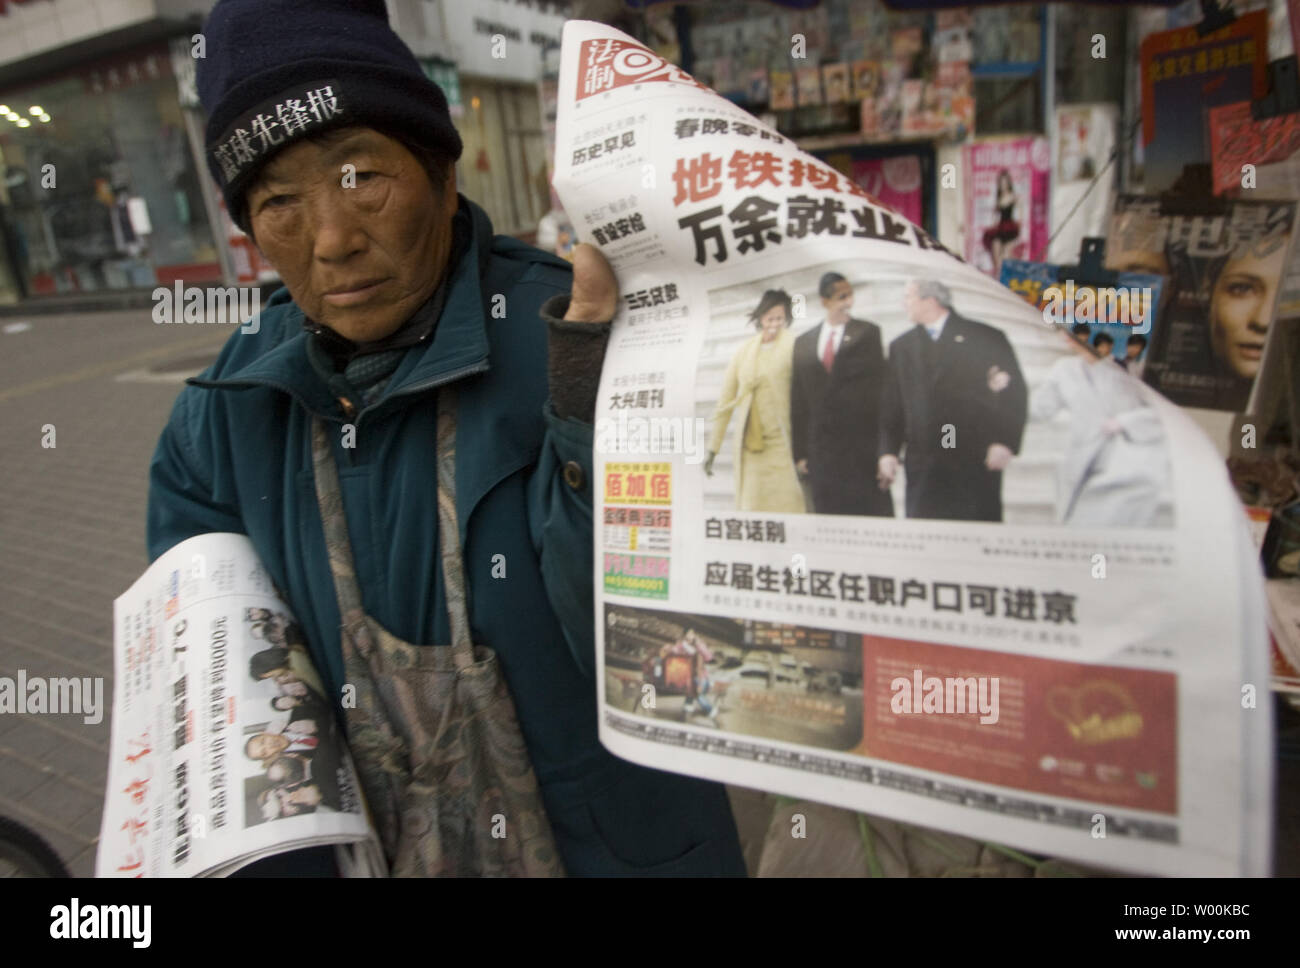 A Chinese news vendor sells newspapers featuring front-page coverage of U.S. President Barack Obama's inauguration as the 44th President of America in Beijing January 21, 2009. China offered a nervous welcome to U.S. President Barack Obama, expressing concern over the direction he may take bilateral ties while paying tribute to the efforts of George W. Bush. China censored parts of  Obama's inauguration speech on websites and state TV. (UPI Photo/Stephen Shaver) Stock Photo